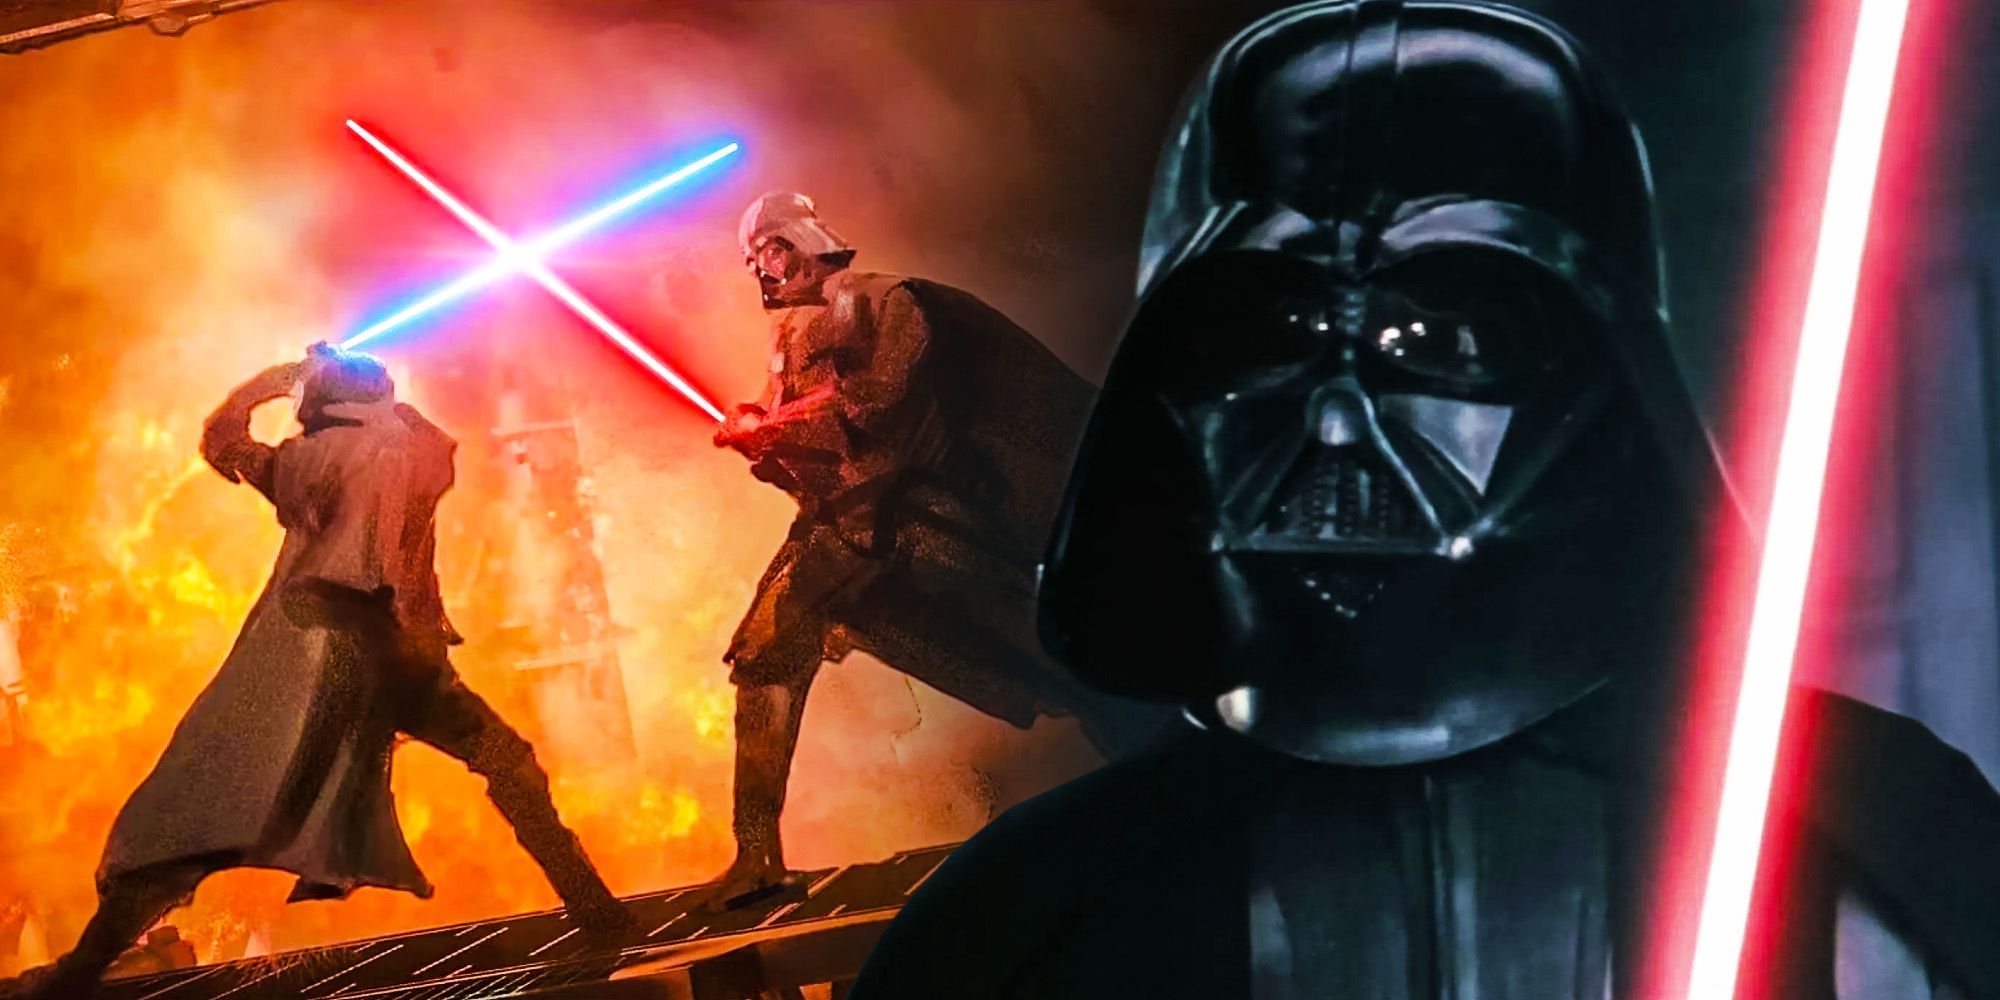 Obi wan and darth vader rematch change a new hope line